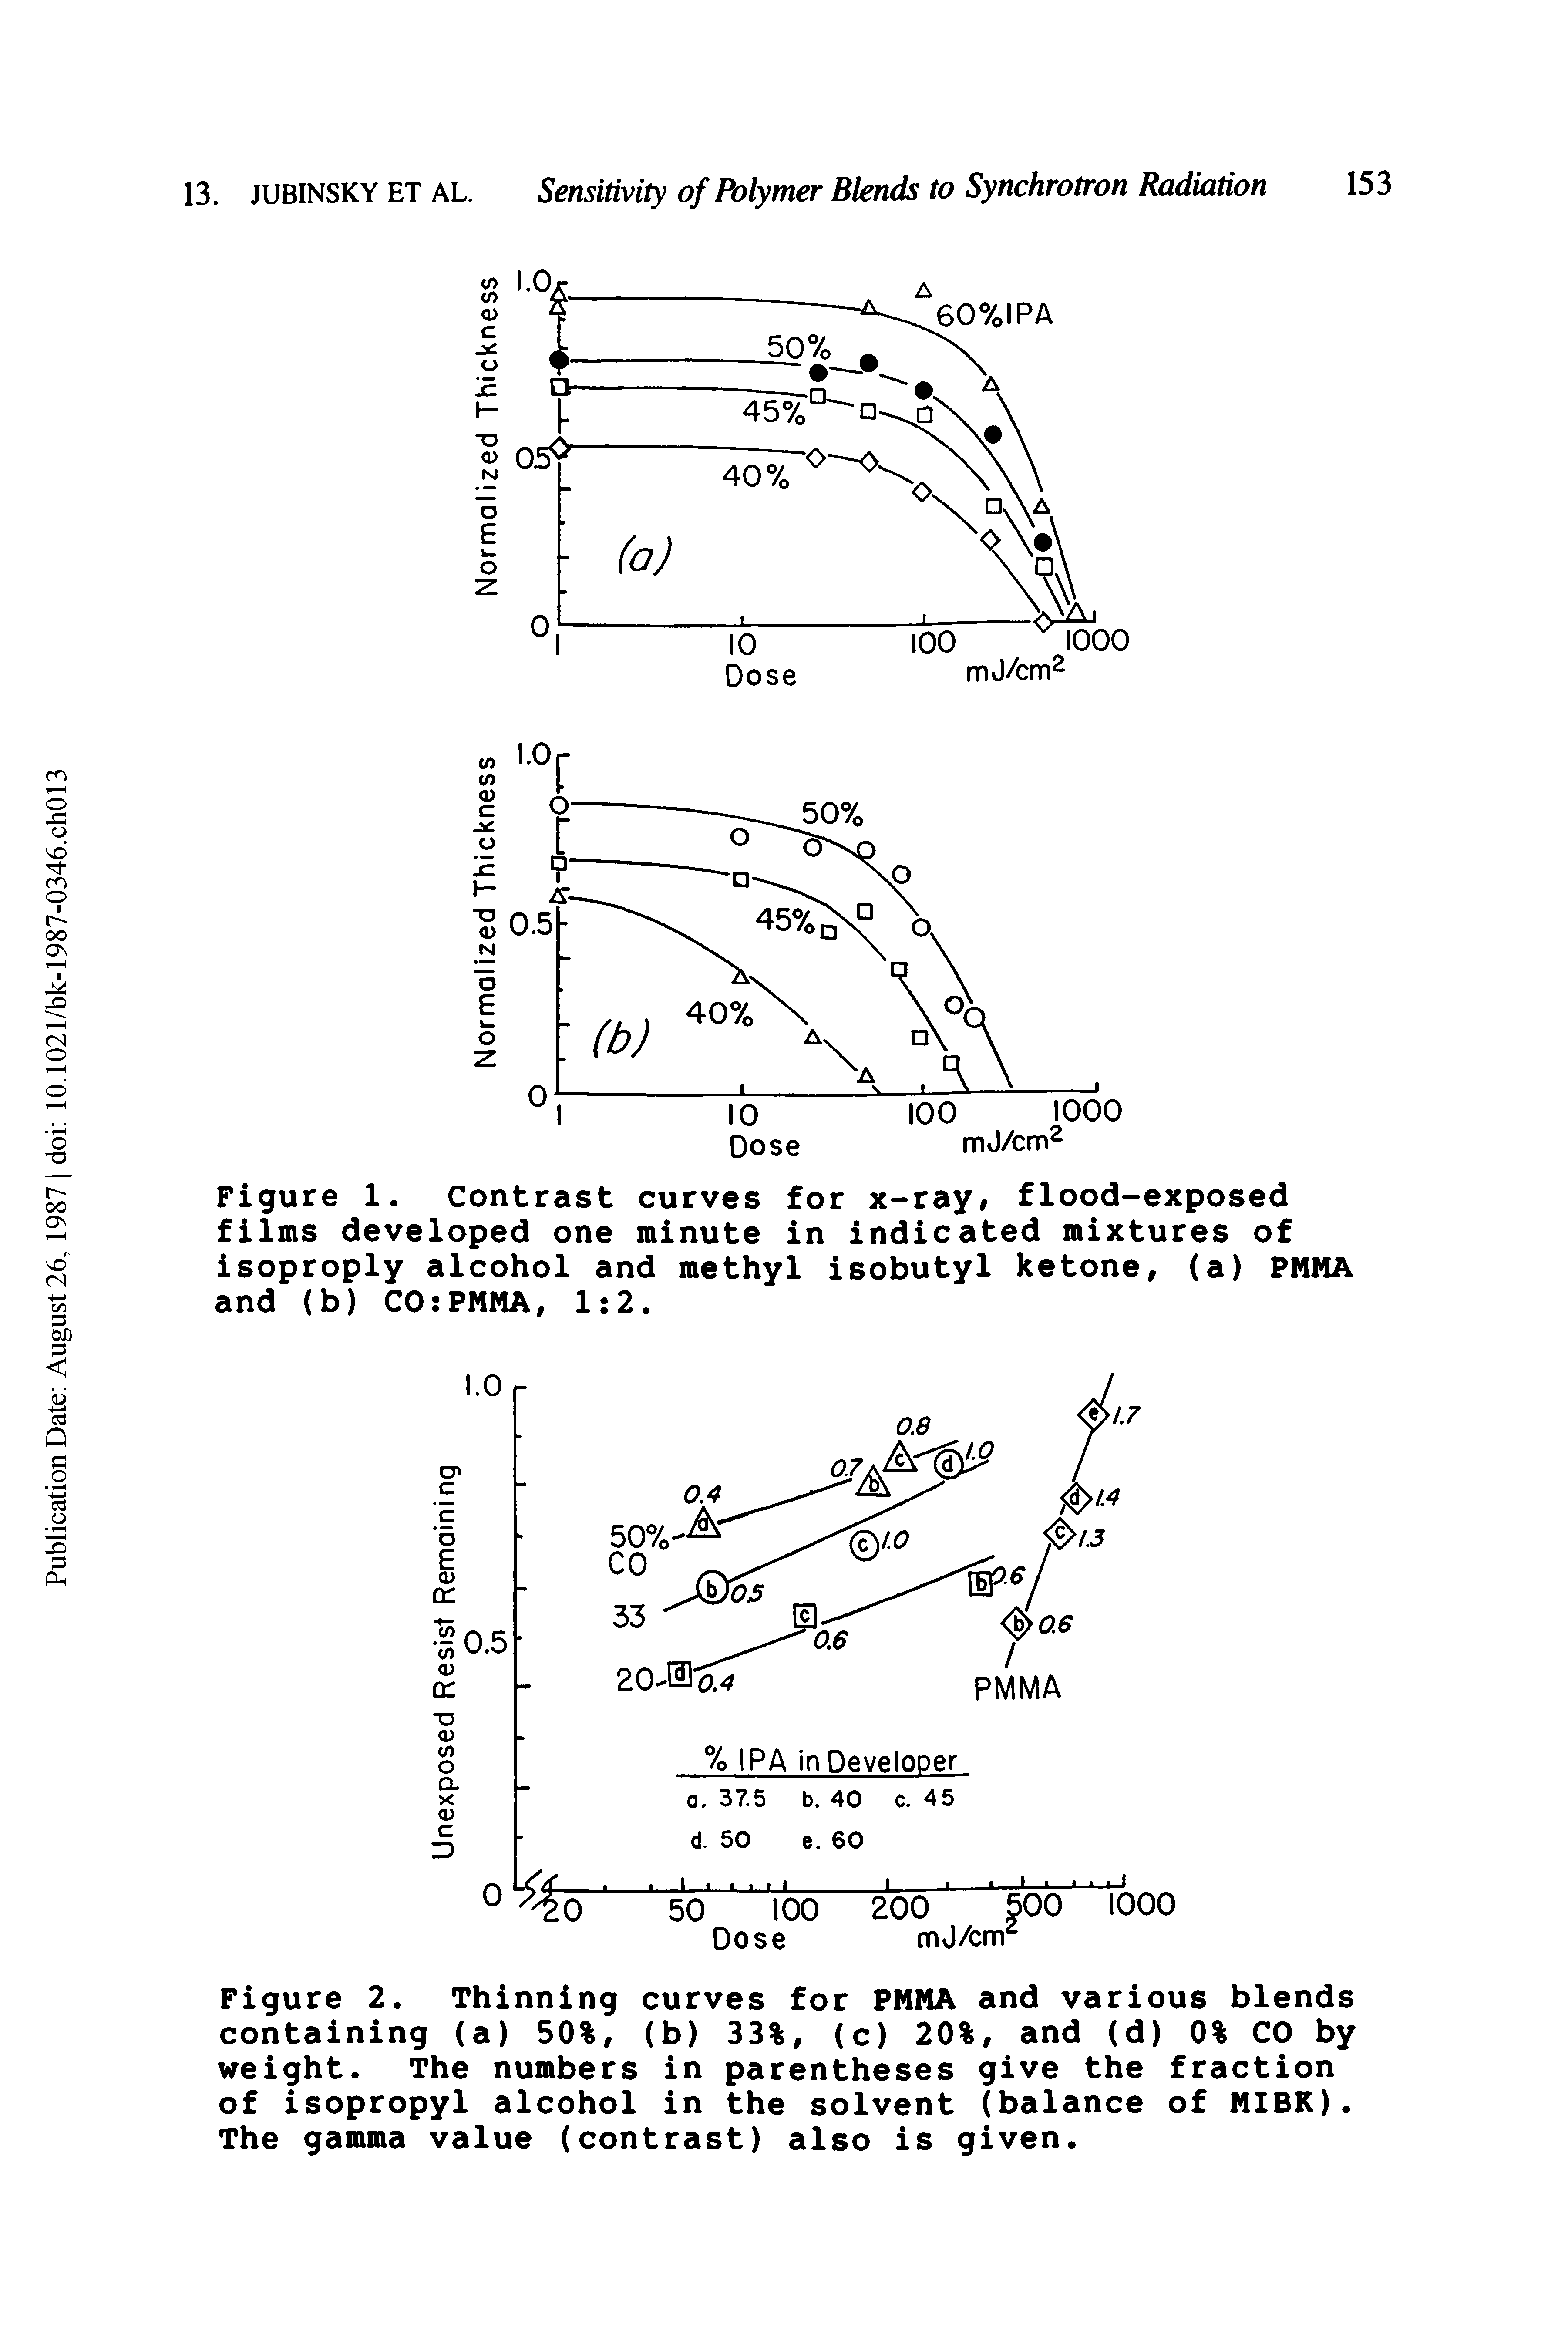 Figure 1. Contrast curves for x-ray, flood-exposed films developed one minute in indicated mixtures of isoproply alcohol and methyl isobutyl ketone, (a) PMMA and (b) CO PMMA, 1 2.